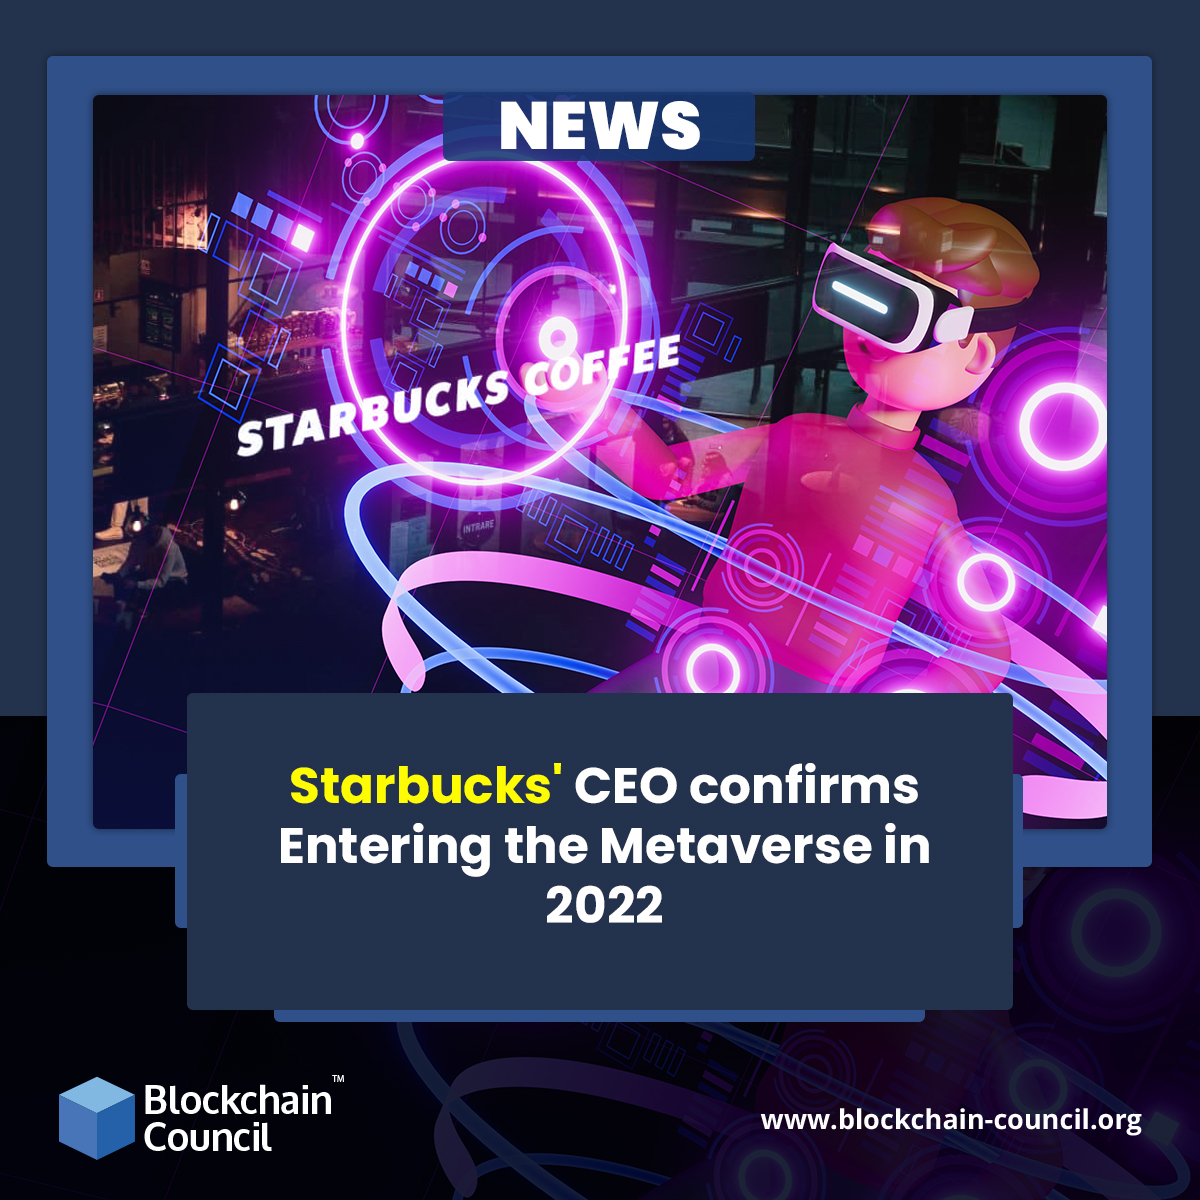 Starbucks' CEO confirms Entering the Metaverse in 2022